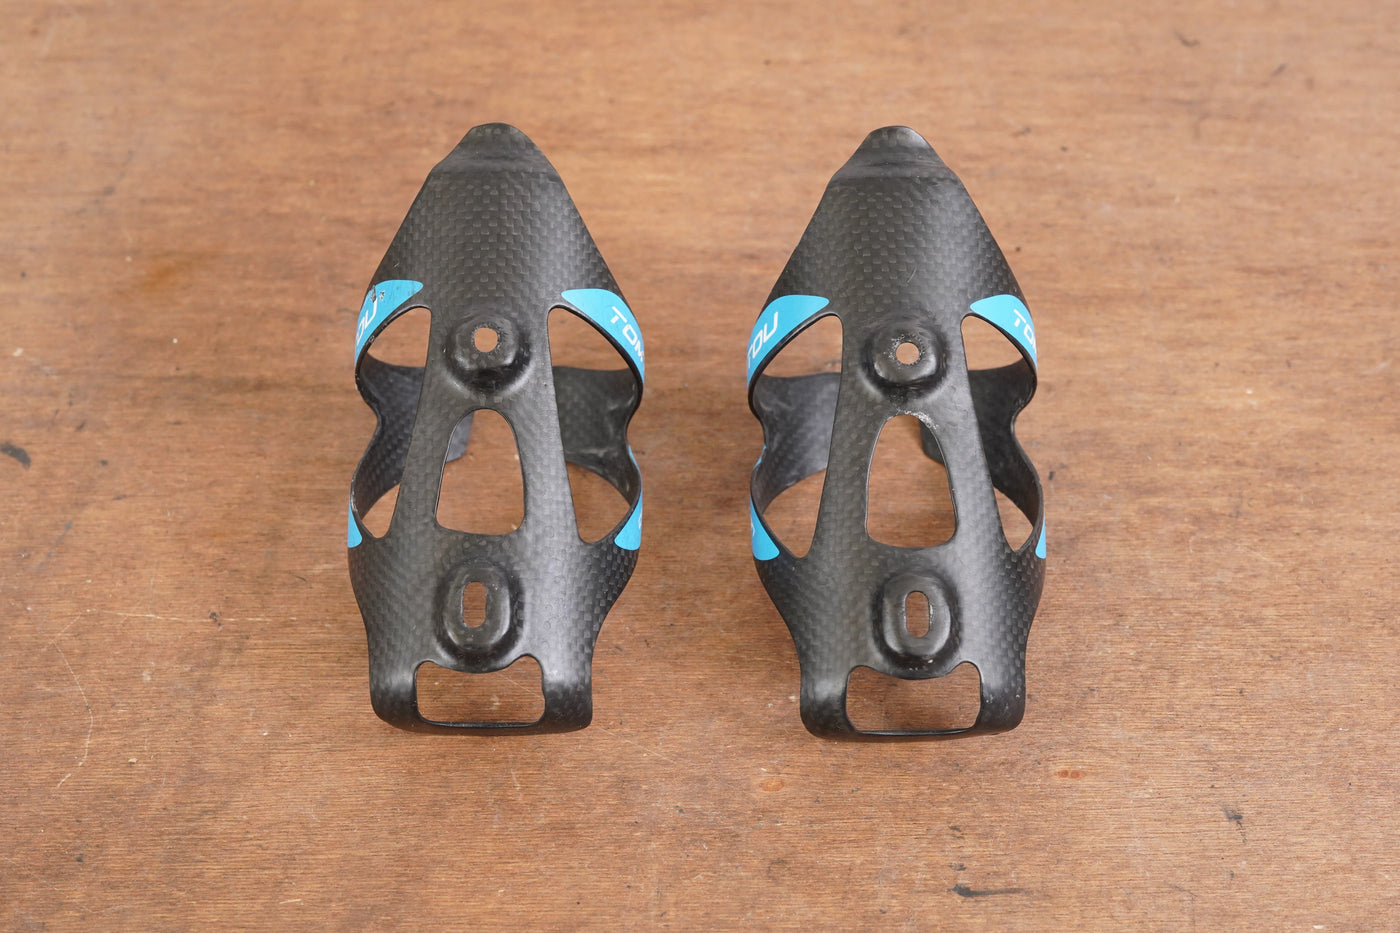 (2) Tomtou Carbon Water Bottle Cages 48g